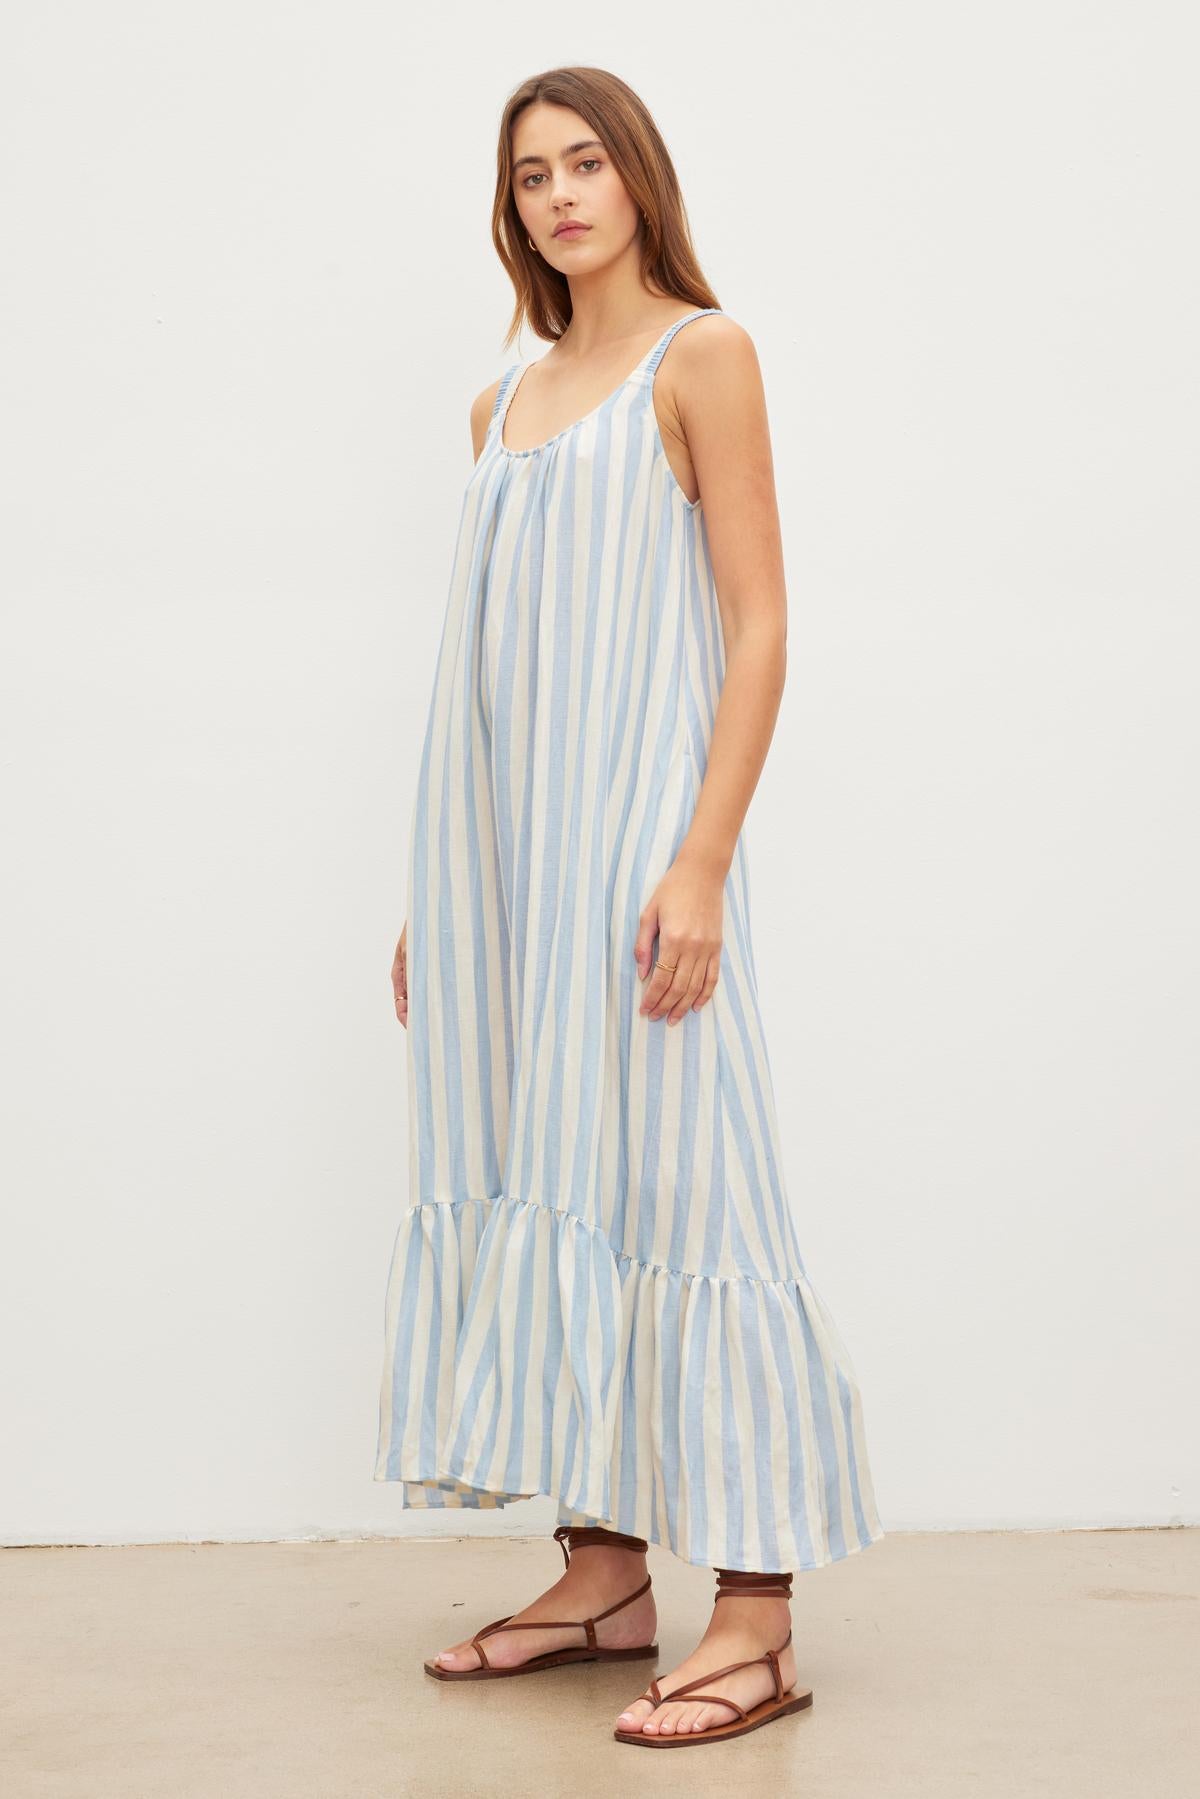 A woman stands against a plain background, wearing a Velvet by Graham & Spencer MERADITH STRIPED LINEN MAXI DRESS with thin straps and ruffled hemline, paired with brown sandals.-36580695474369